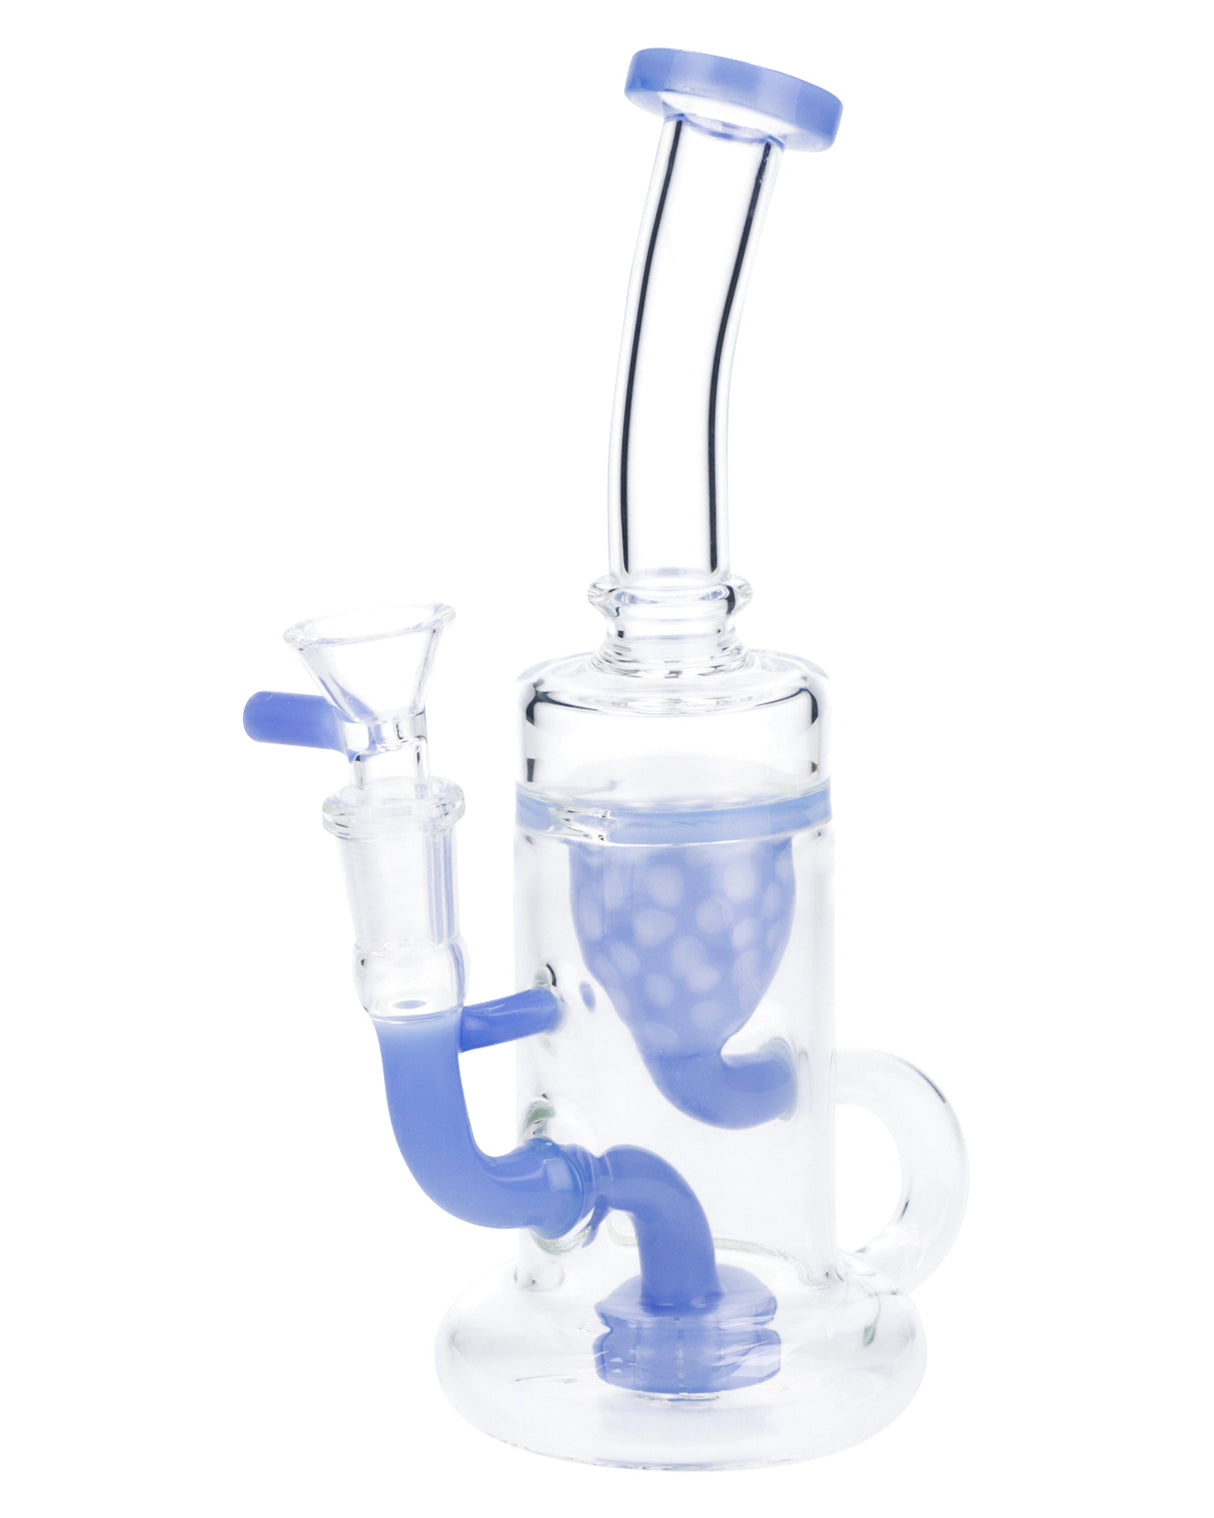 Milky Blue Quartz Water Pipe with Bent Neck & Bowl - 8 in, Front View on White Background